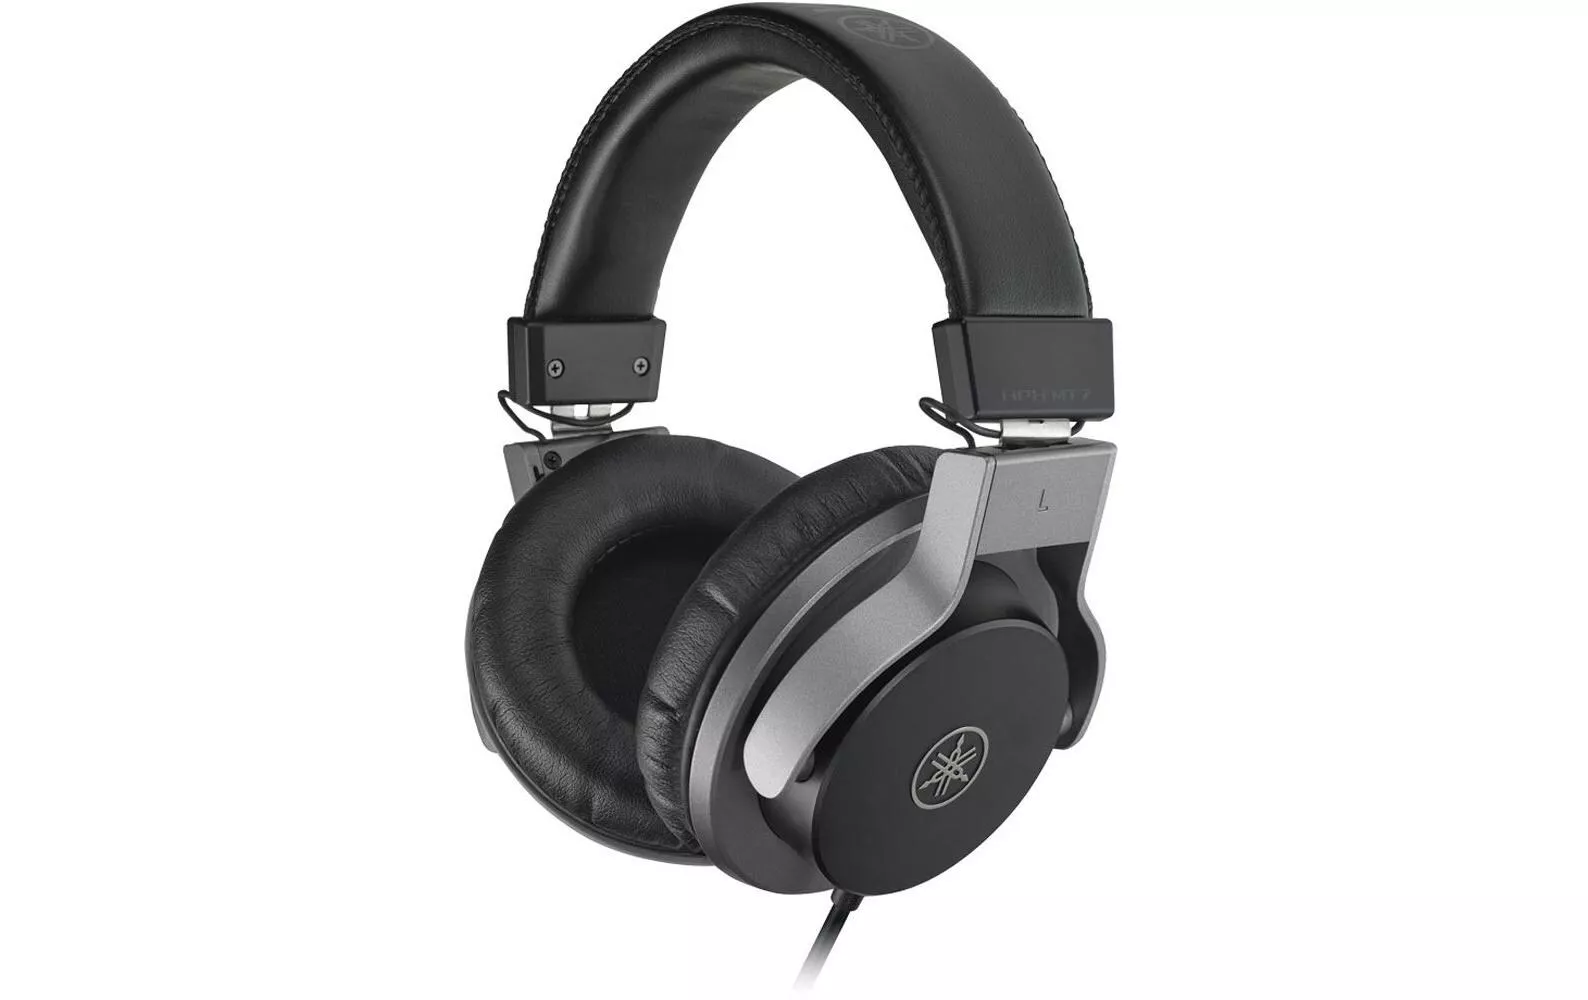 HPH-MT7 Cuffie over-ear nere